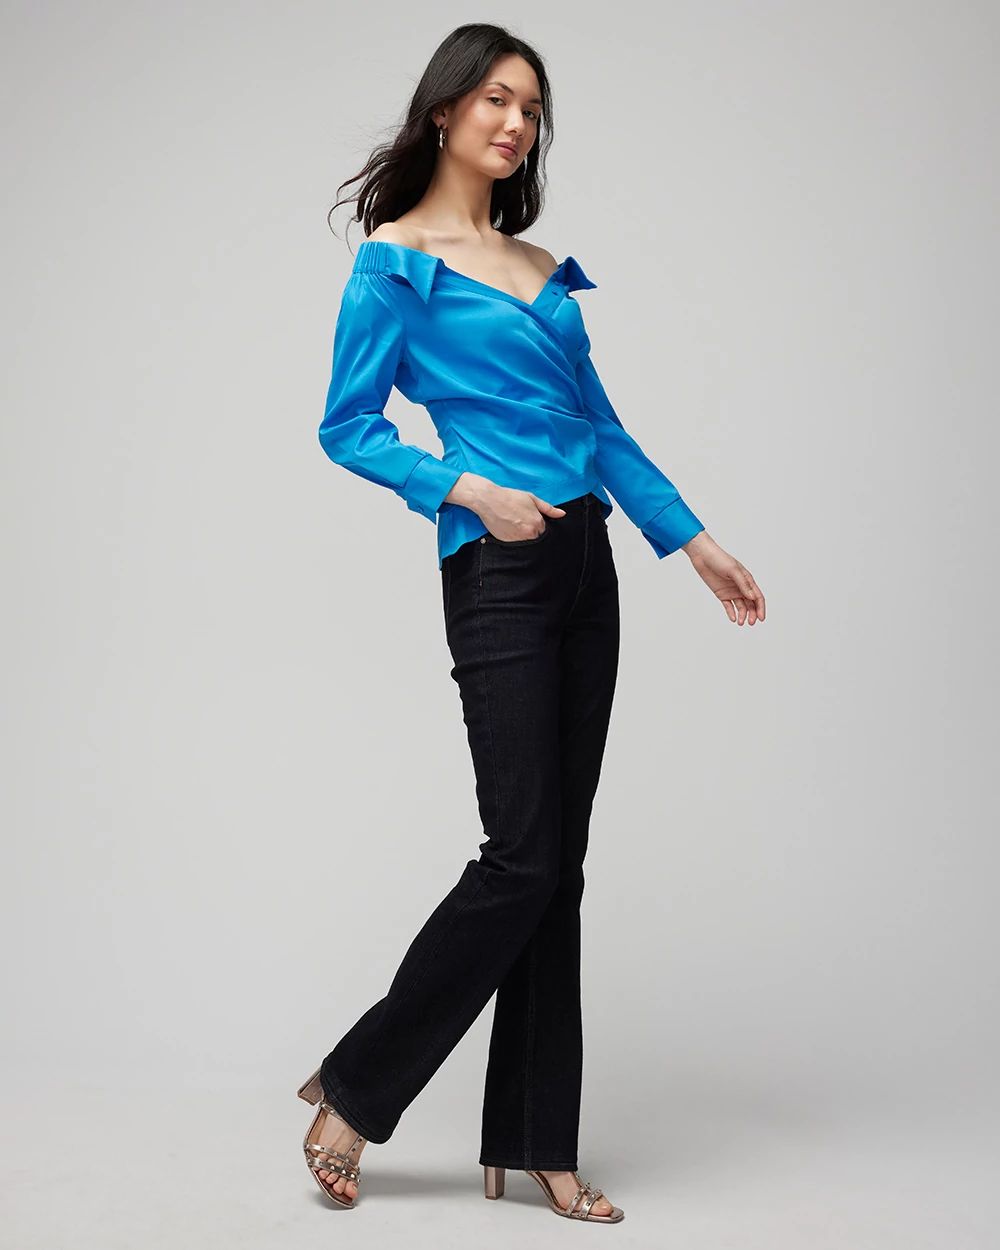 Off-the-Shoulder Poplin Surplice Top click to view larger image.